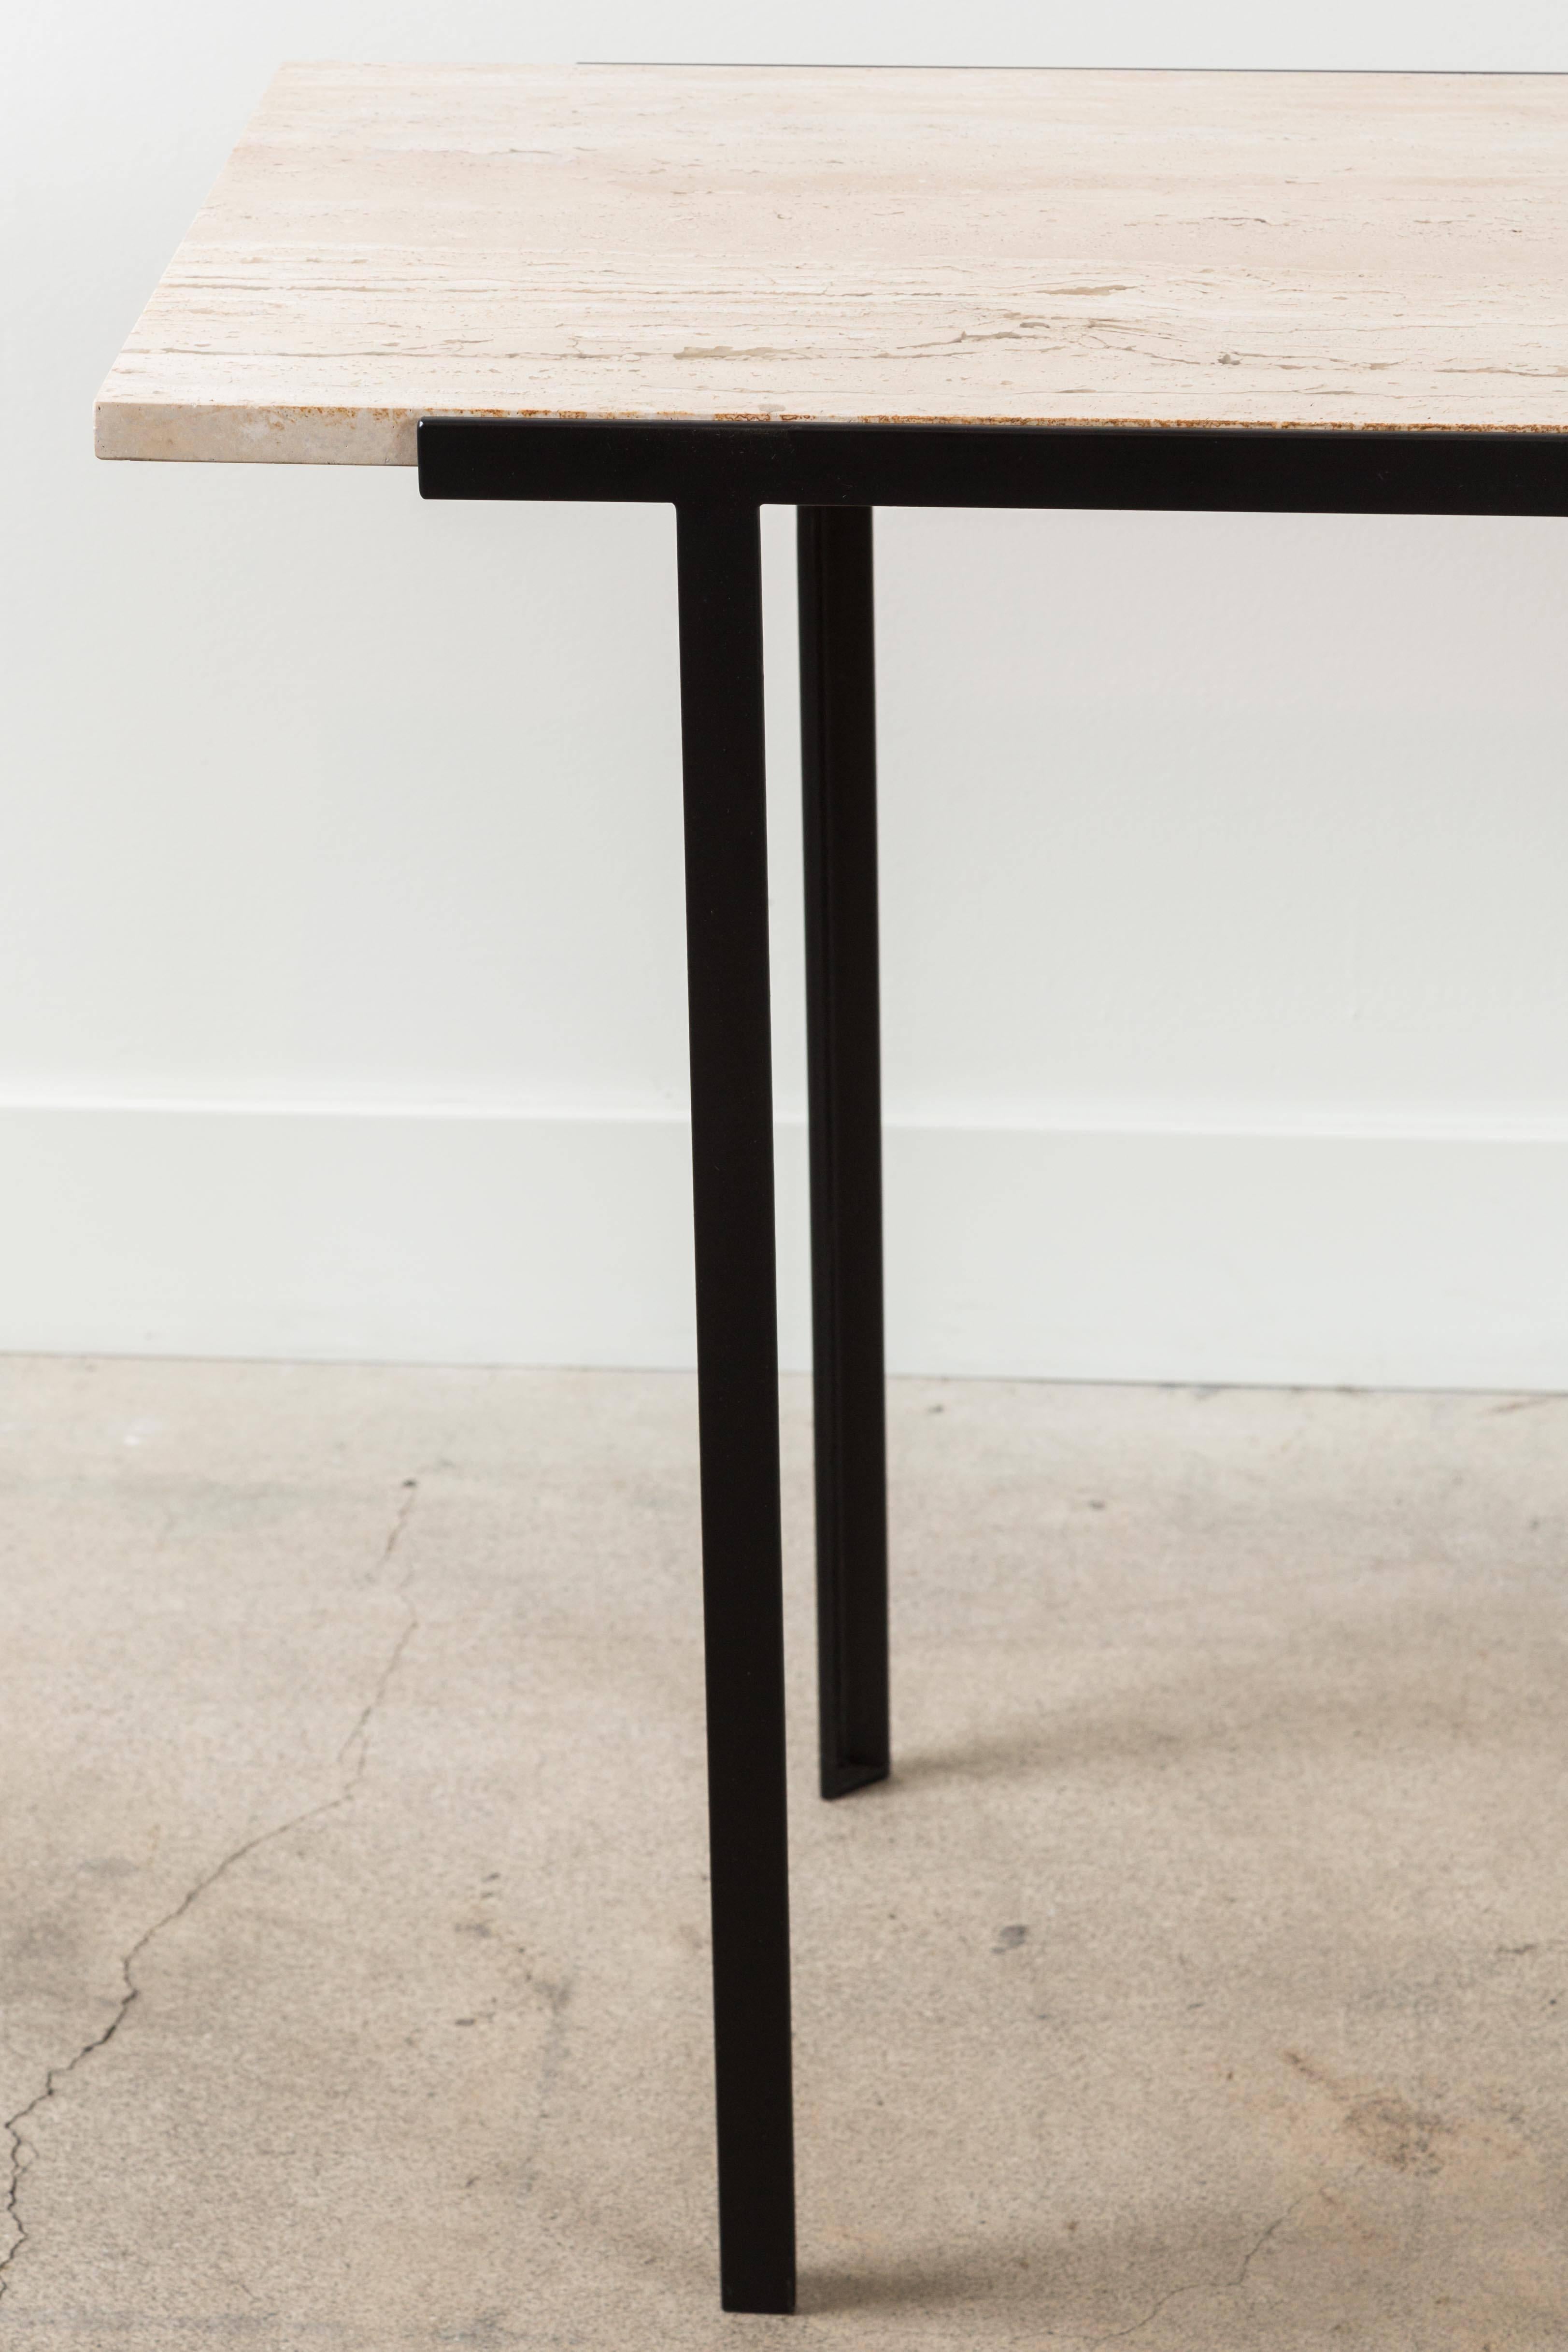 The Montrose console table features a powder-coated steel base with a minimal honed open grain travertine stone top. For indoor or outdoor use.

The Lawson-Fenning Collection is designed and handmade in Los Angeles, California.

Available to order